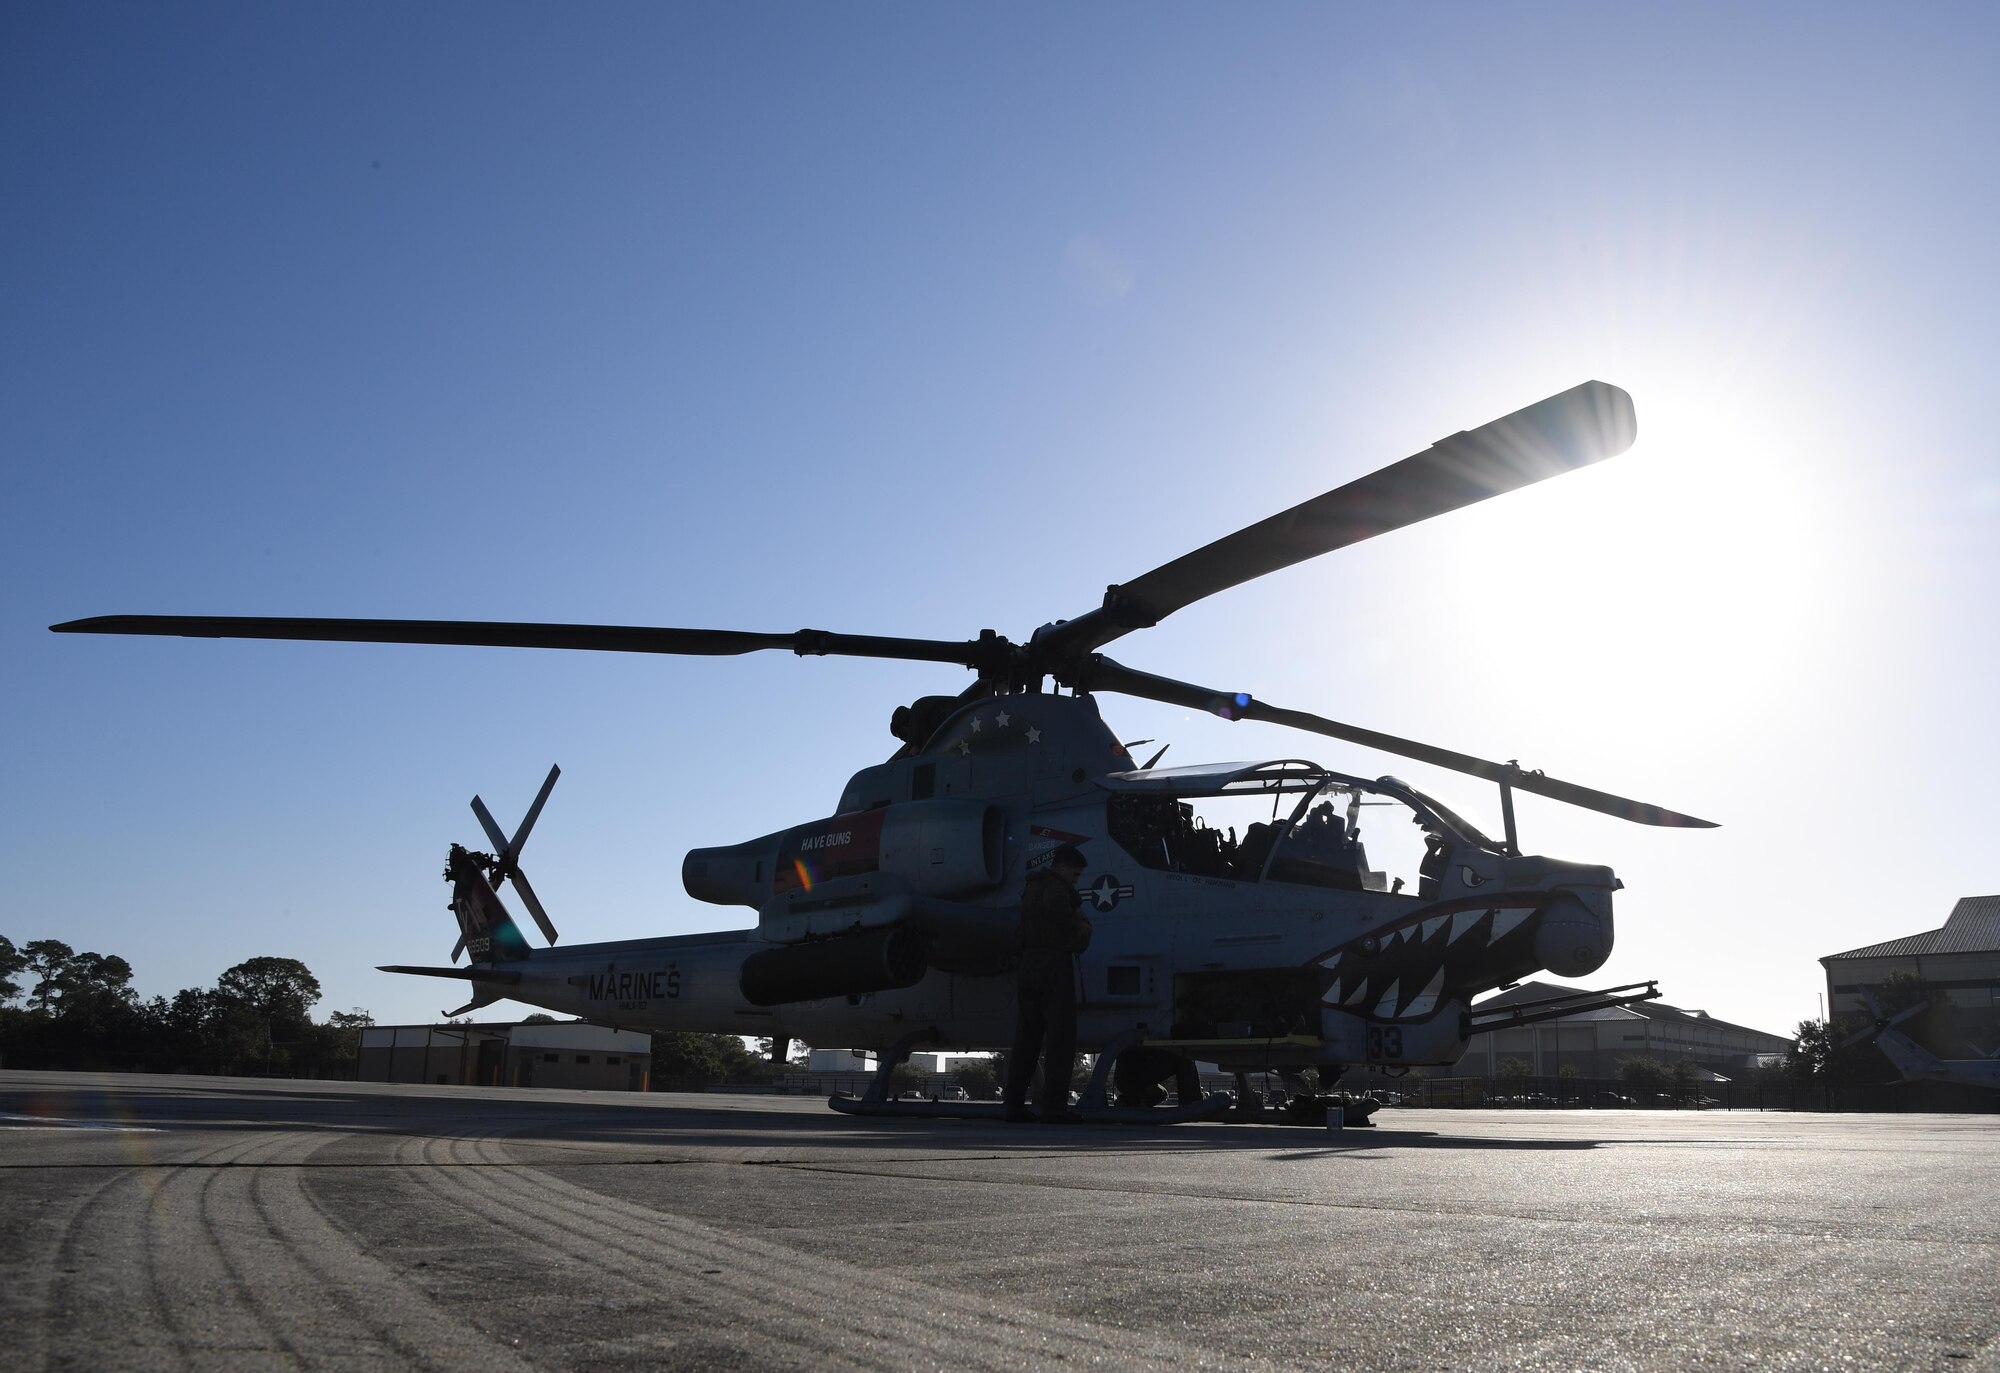 An AH-1Z Cobra from the Marine Light Attack Helicopter Squadron 167, Marine Corps Air Station New River, North Carolina, is on displayed on the flightline at Keesler Air Force Base, Mississippi, Oct. 21, 2020. Two AH-1Z Cobras and two UH-1Y Hueys were at Keesler for joint training with the Marine Special Operations Command during their RAVEN exercise from Oct. 12-21. RAVEN is the exercise Marine Raiders complete after their six-month training cycle in preparation for deployment to ensure operational readiness of the Marine Special Operations Teams. (U.S. Air Force photo by Kemberly Groue)